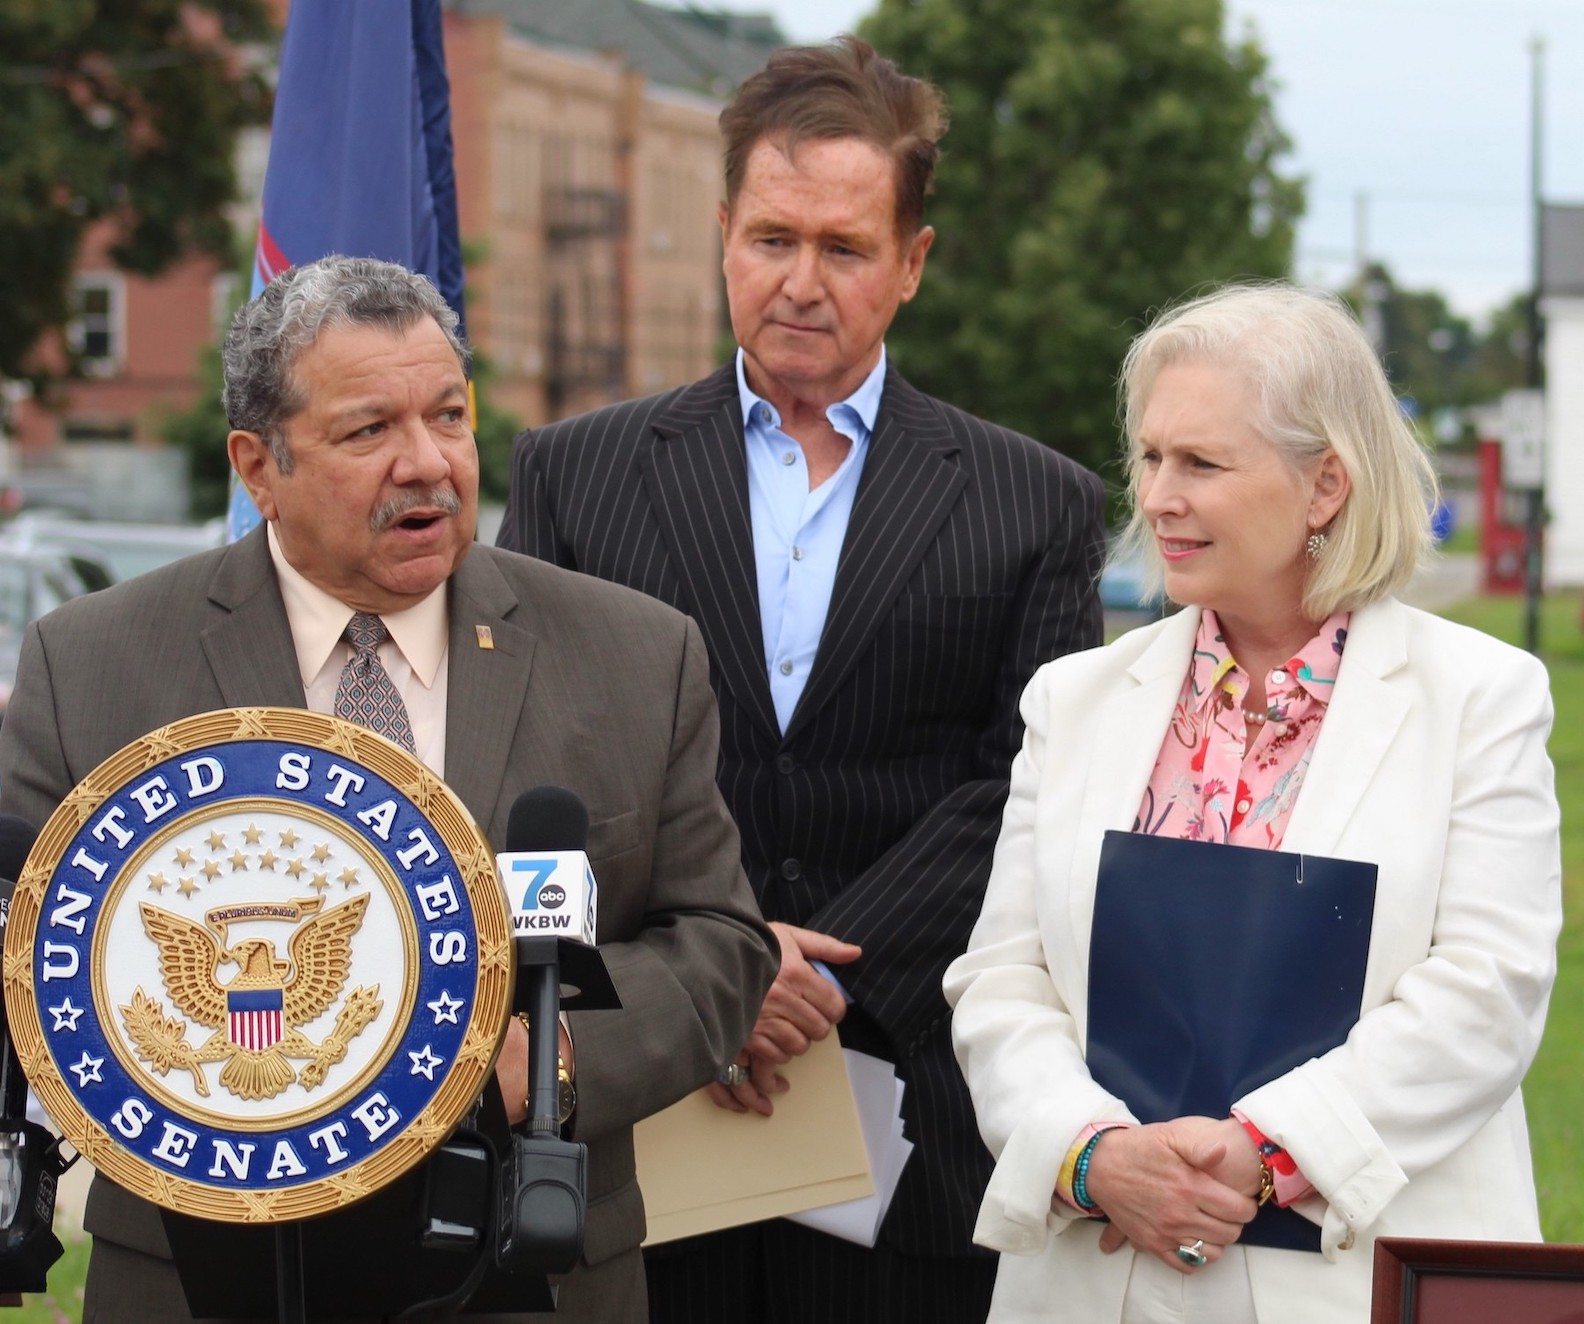 Pictured: Hispanic Heritage Council of WNY President Casimiro D. Rodriguez Sr., Congressman Brian Higgins and U.S. Sen. Kirsten Gillibrand. (Submitted photos)